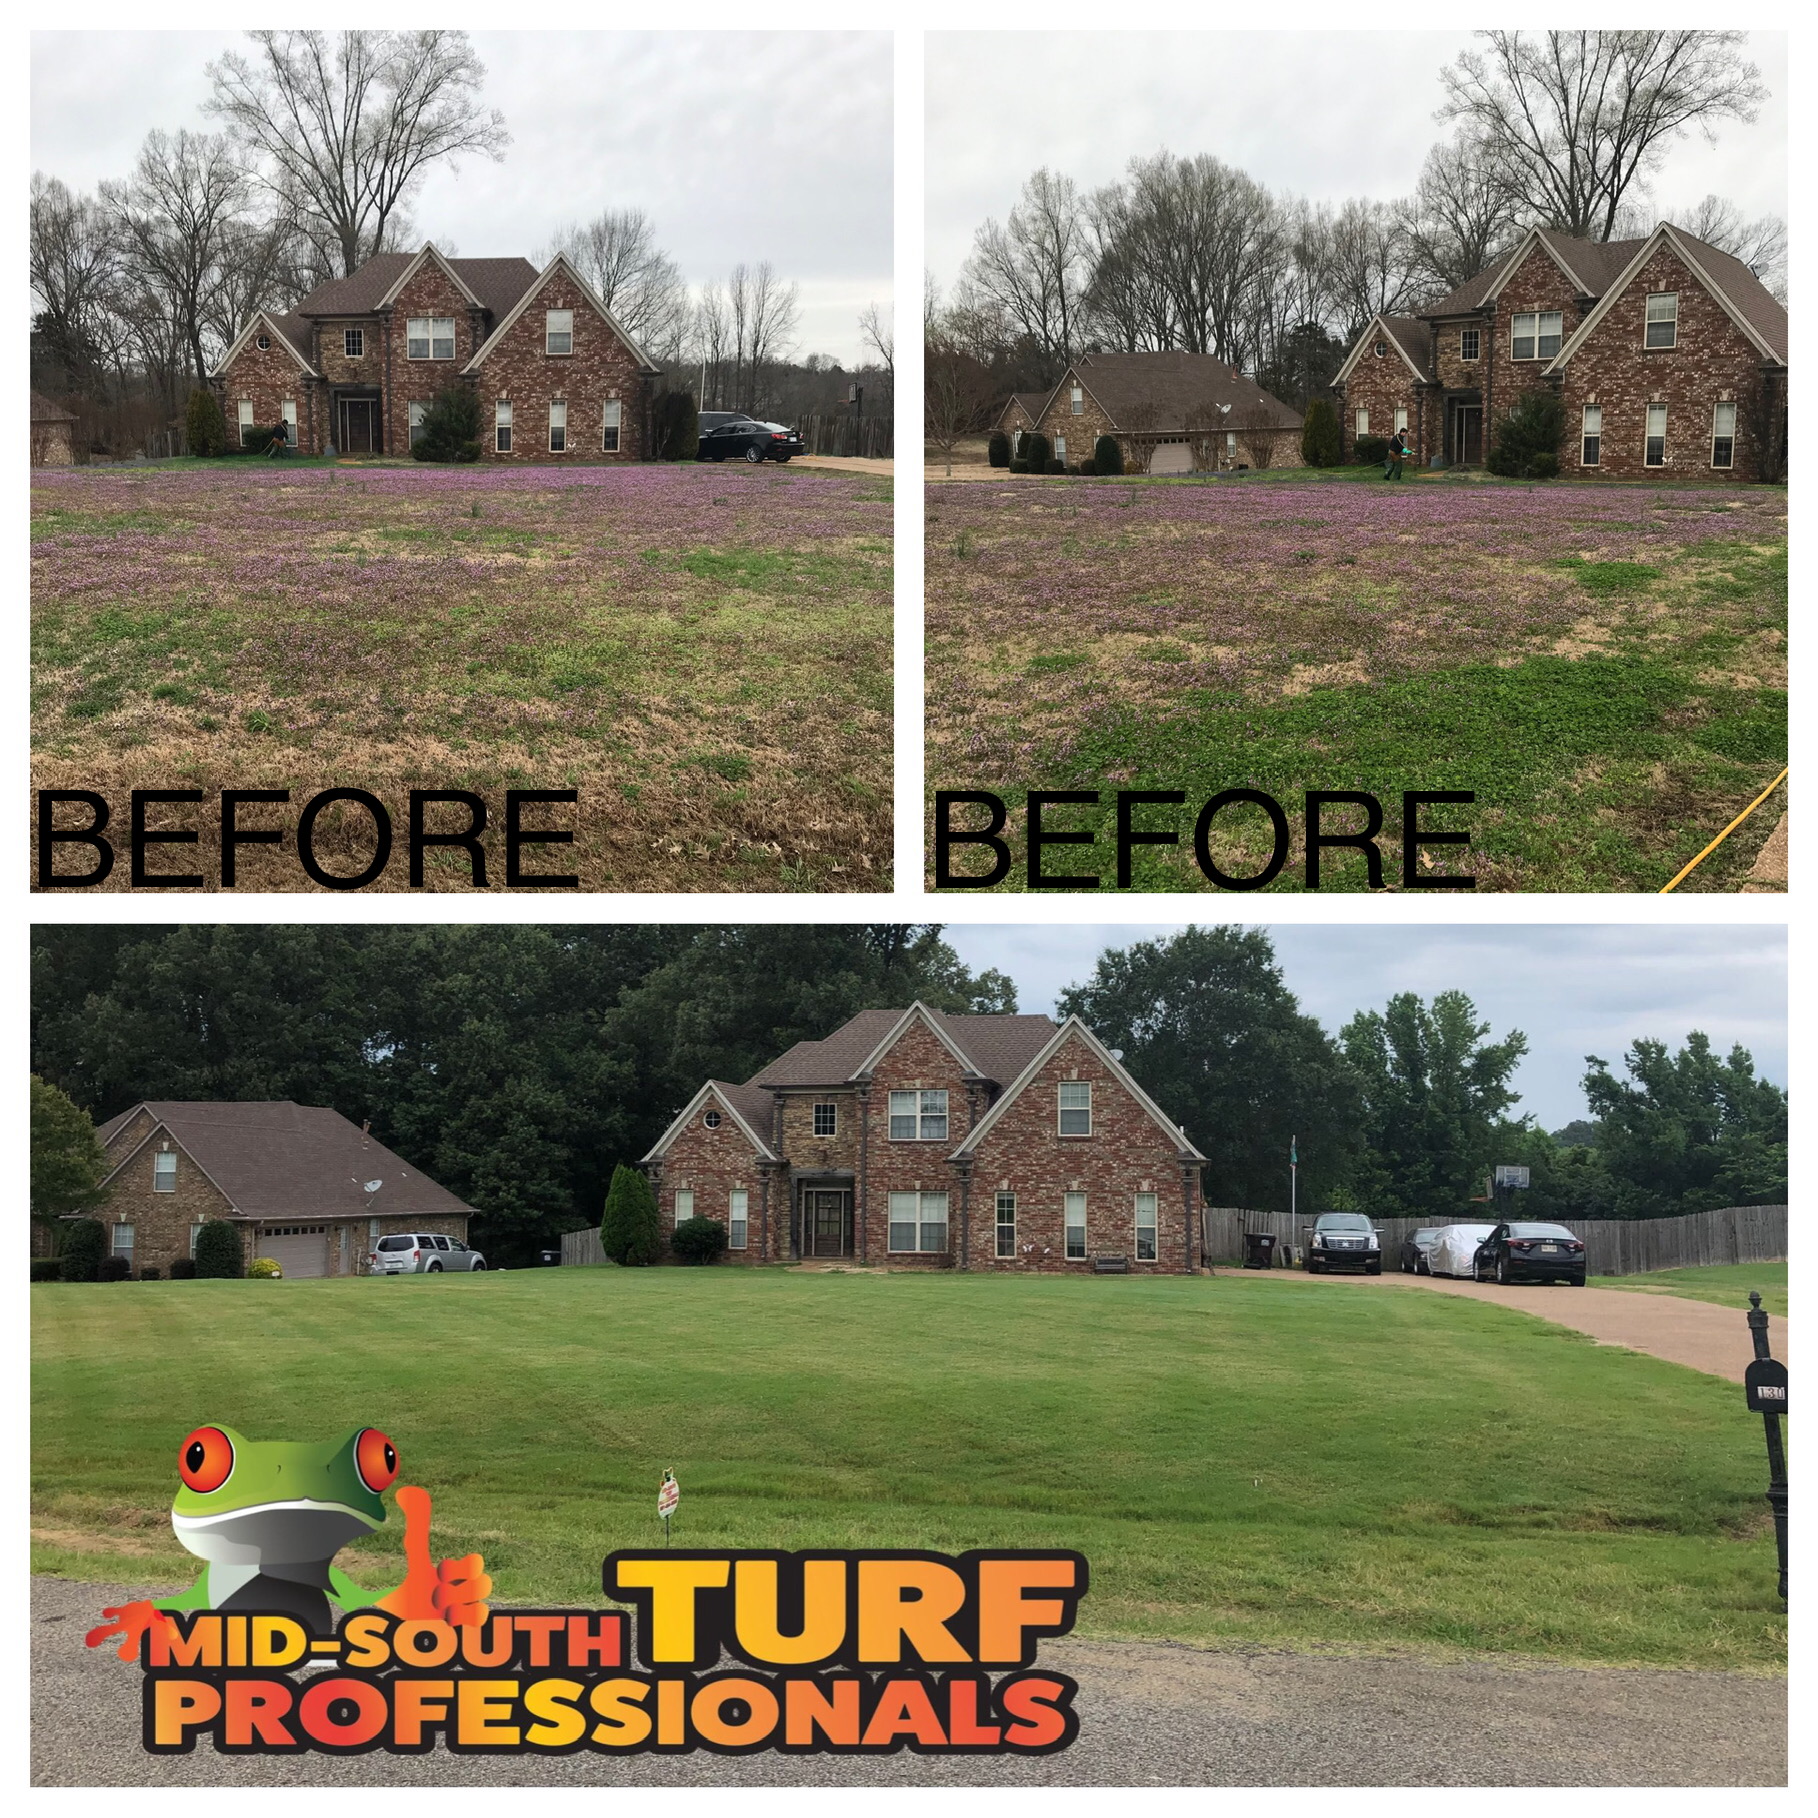 Mid-South Turf Professionals, LLC 195 Bowers Rd, Oakland Tennessee 38060